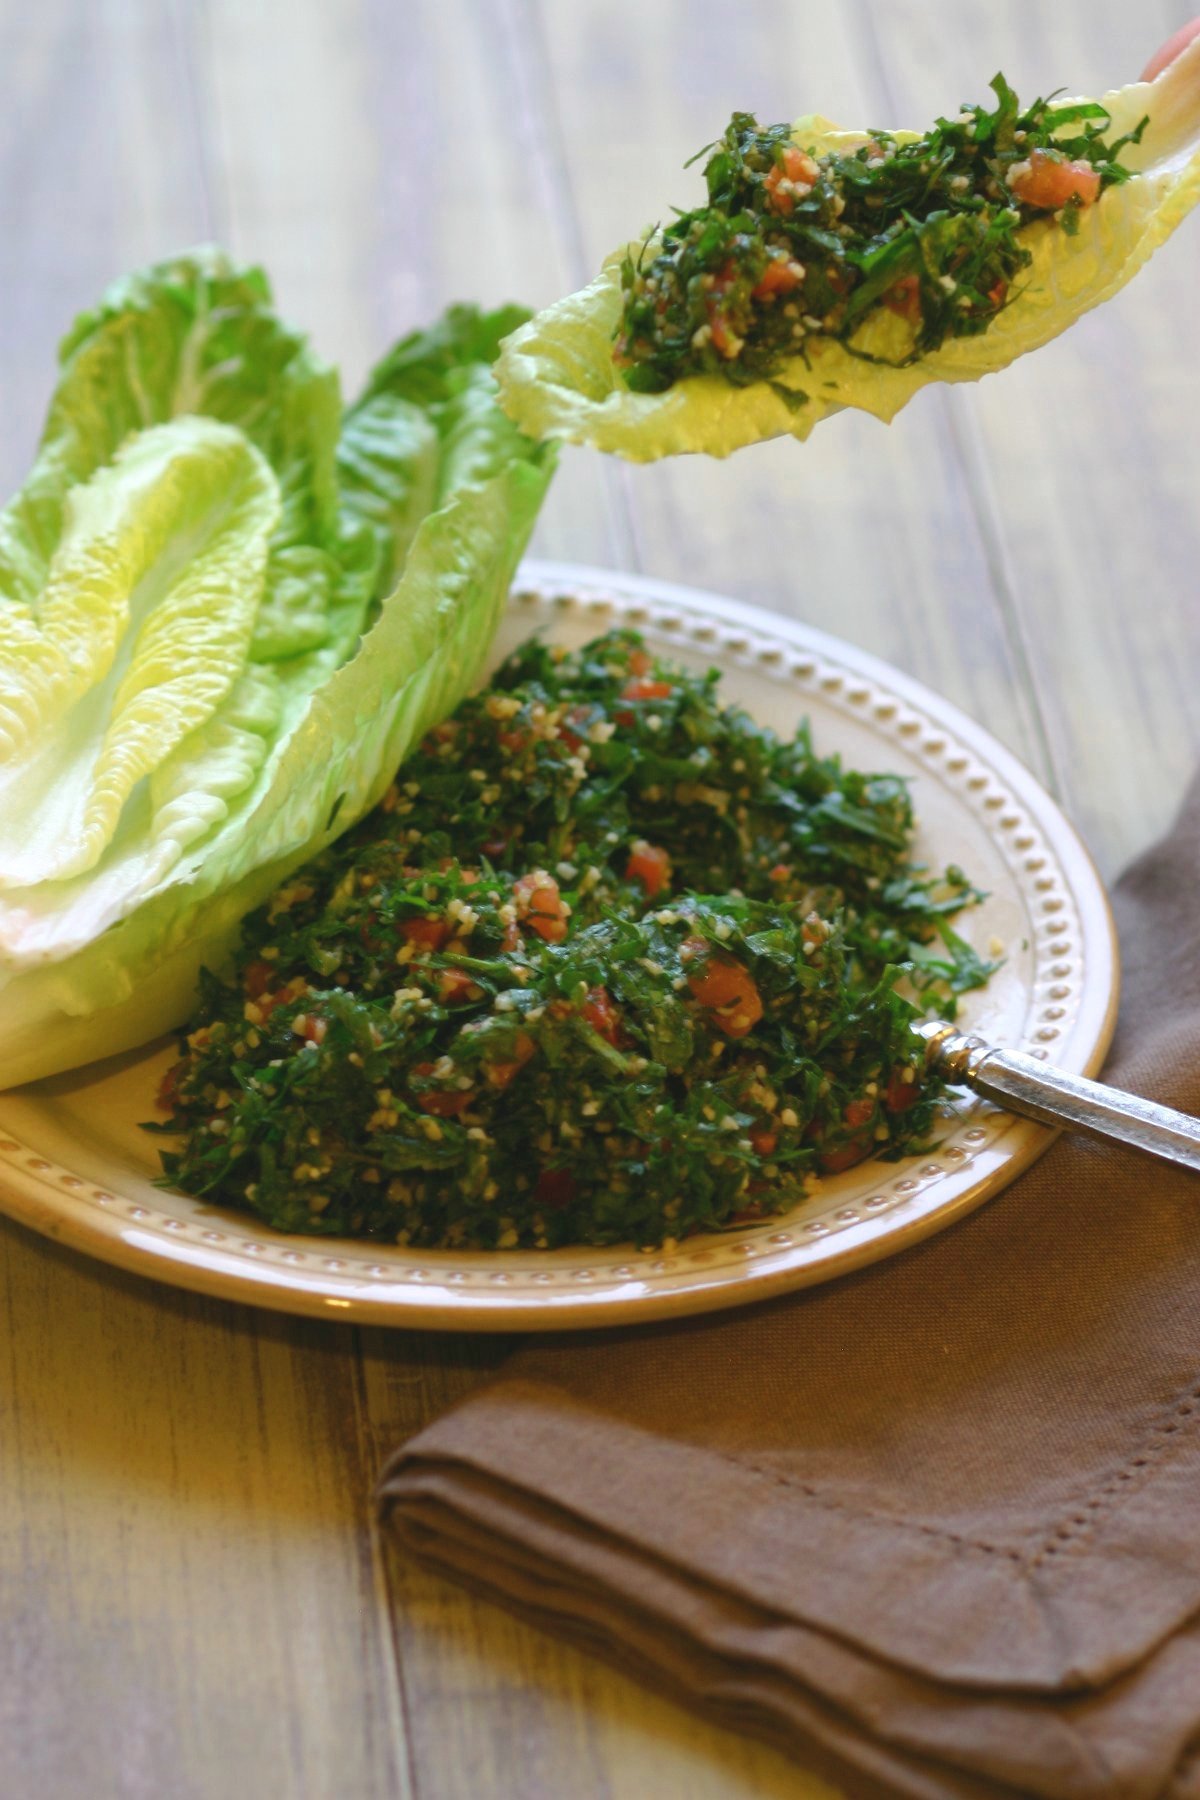 This recipe for Tabbouleh is everything you want it to be: tangy, juicy, and refreshing. Herbs, tomatoes, and bulgur combine to make a mouthwatering salad.